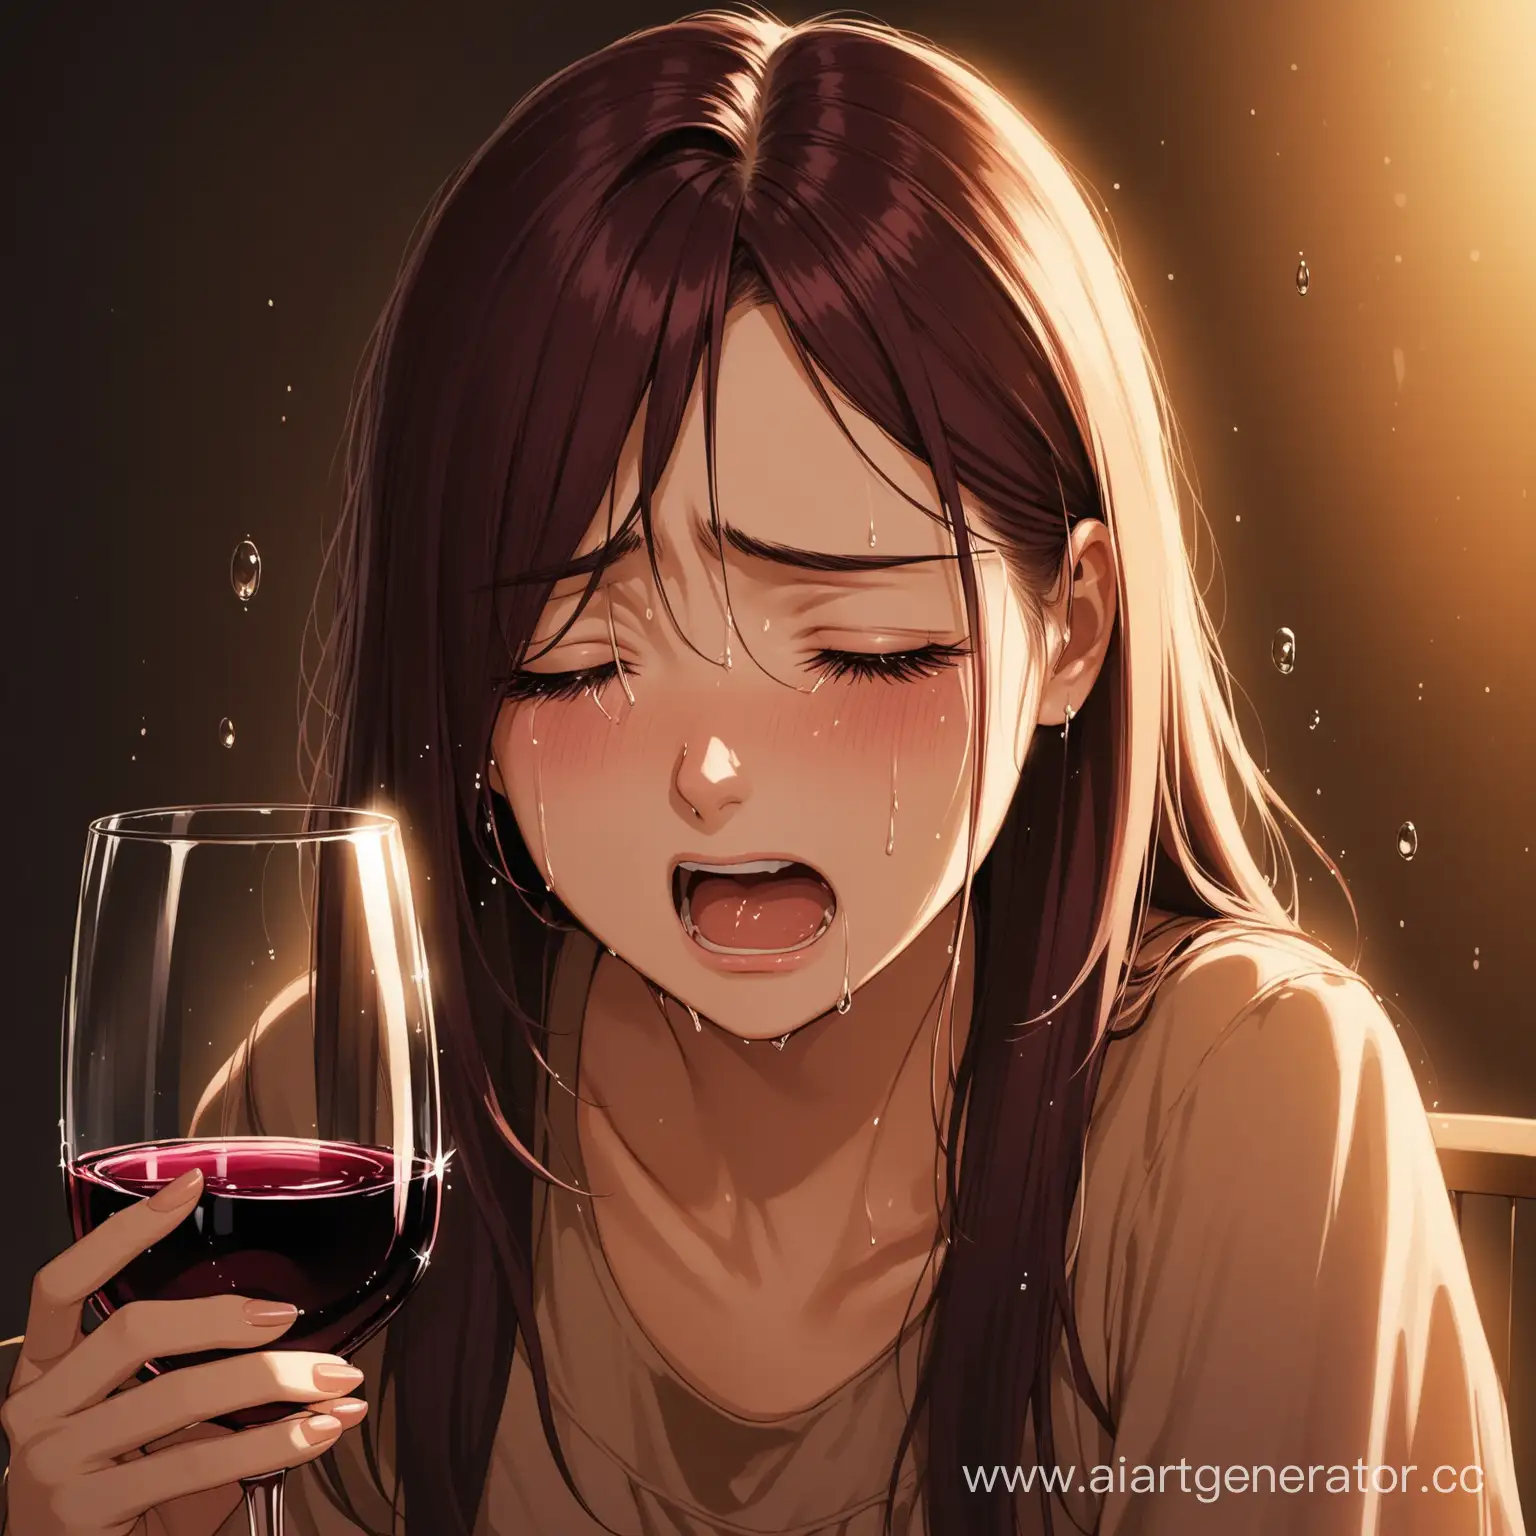 Distressed-Girl-Finishing-a-Glass-of-Wine